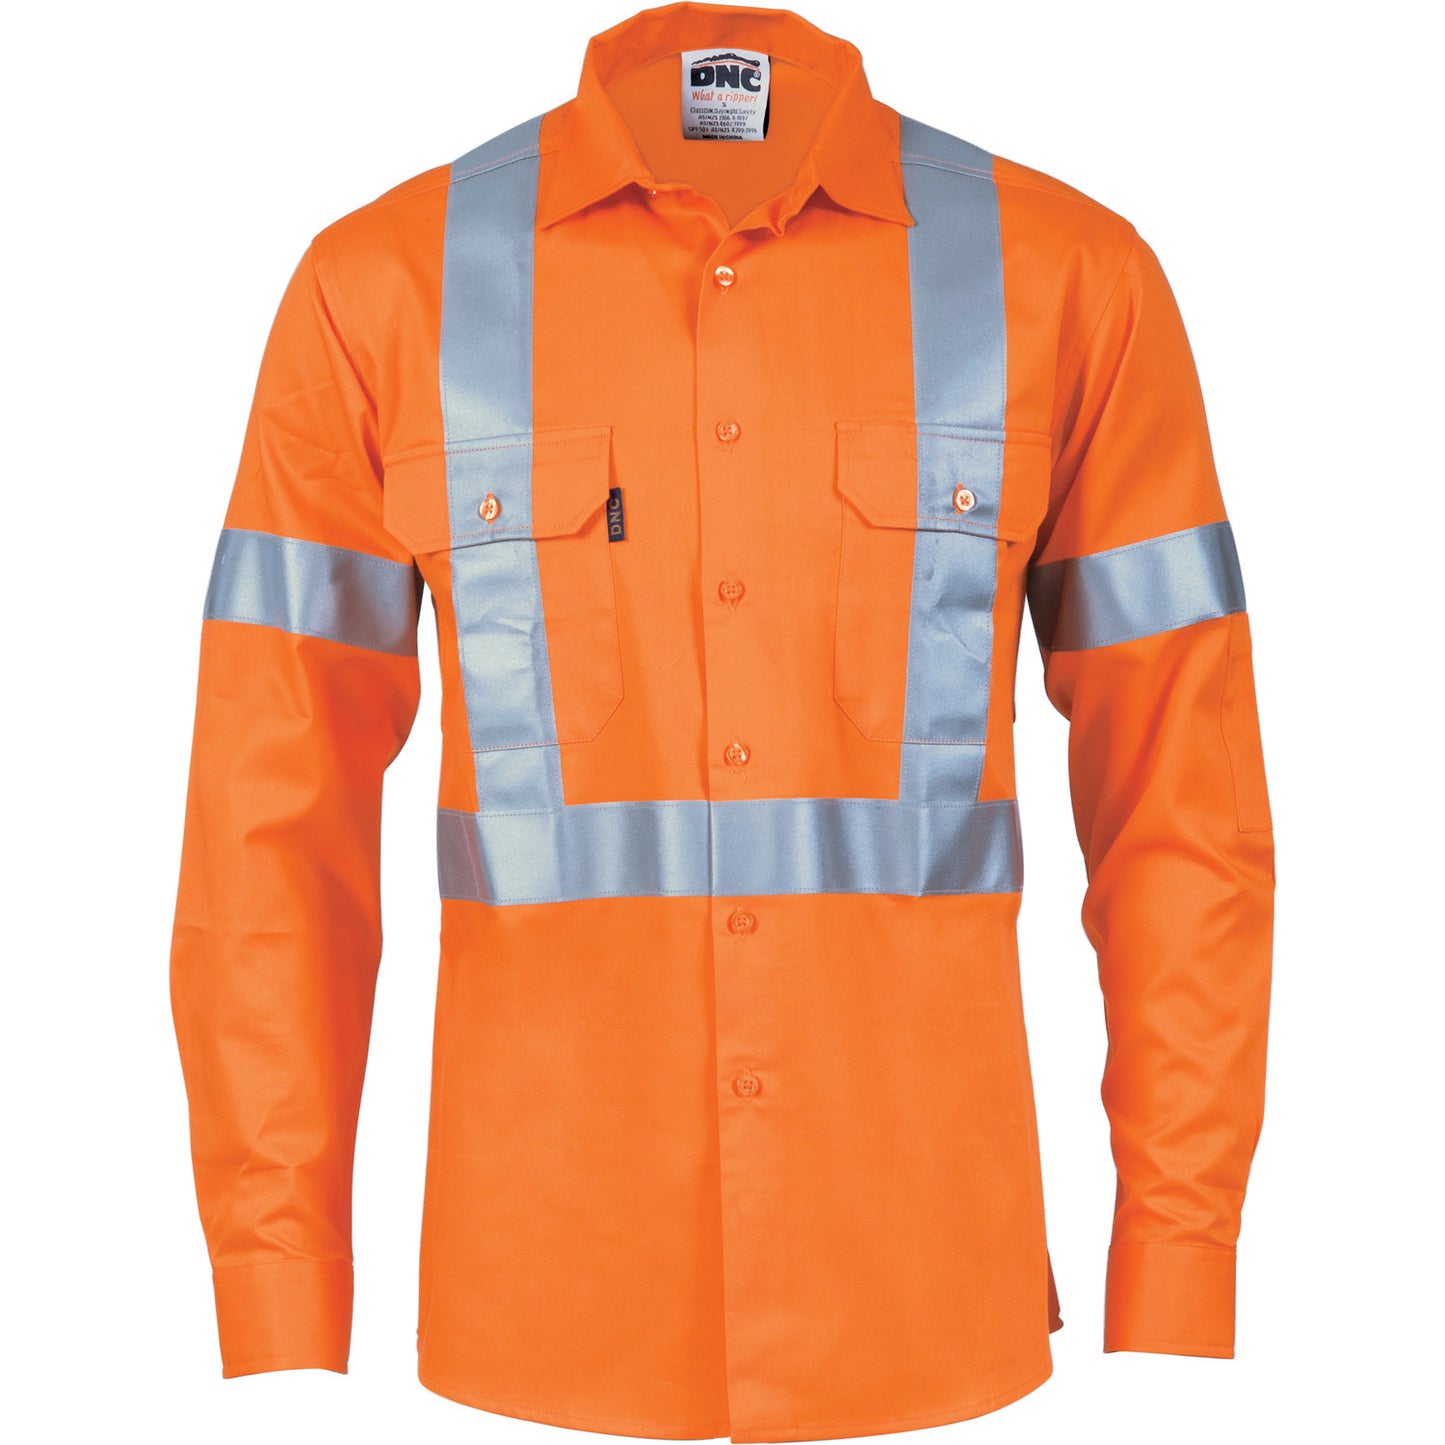 DNC HiVis Cool-Breeze Cotton Shirt with ‘X’ Back & additional 3m R/Tape on Tail- L/S (3746)